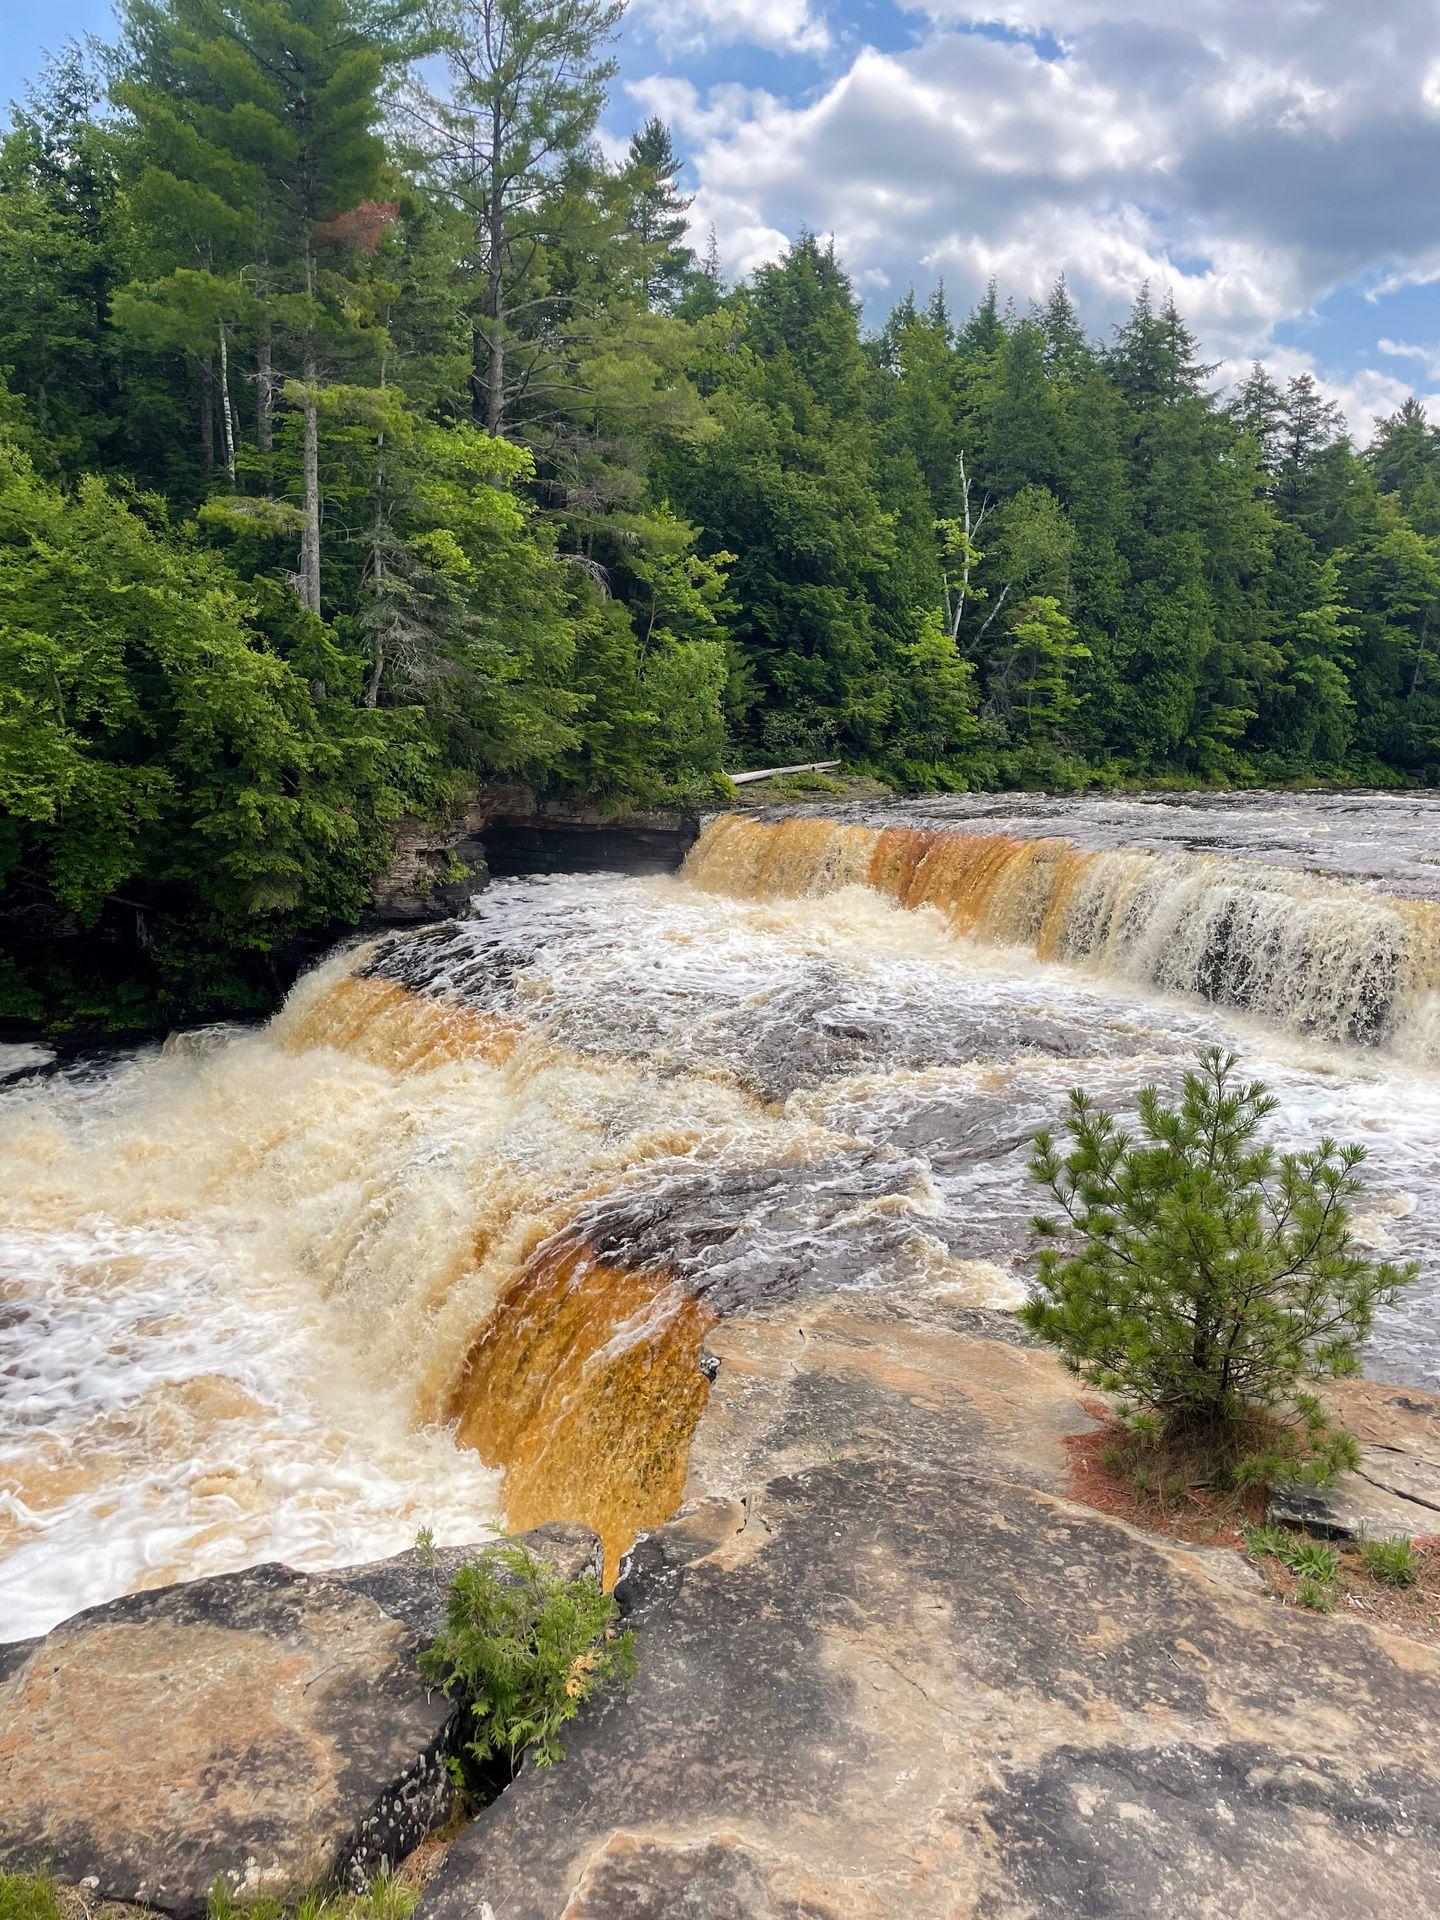 A view of Lower Falls at Tahquamenon Falls State Park. There are tall green trees across the river